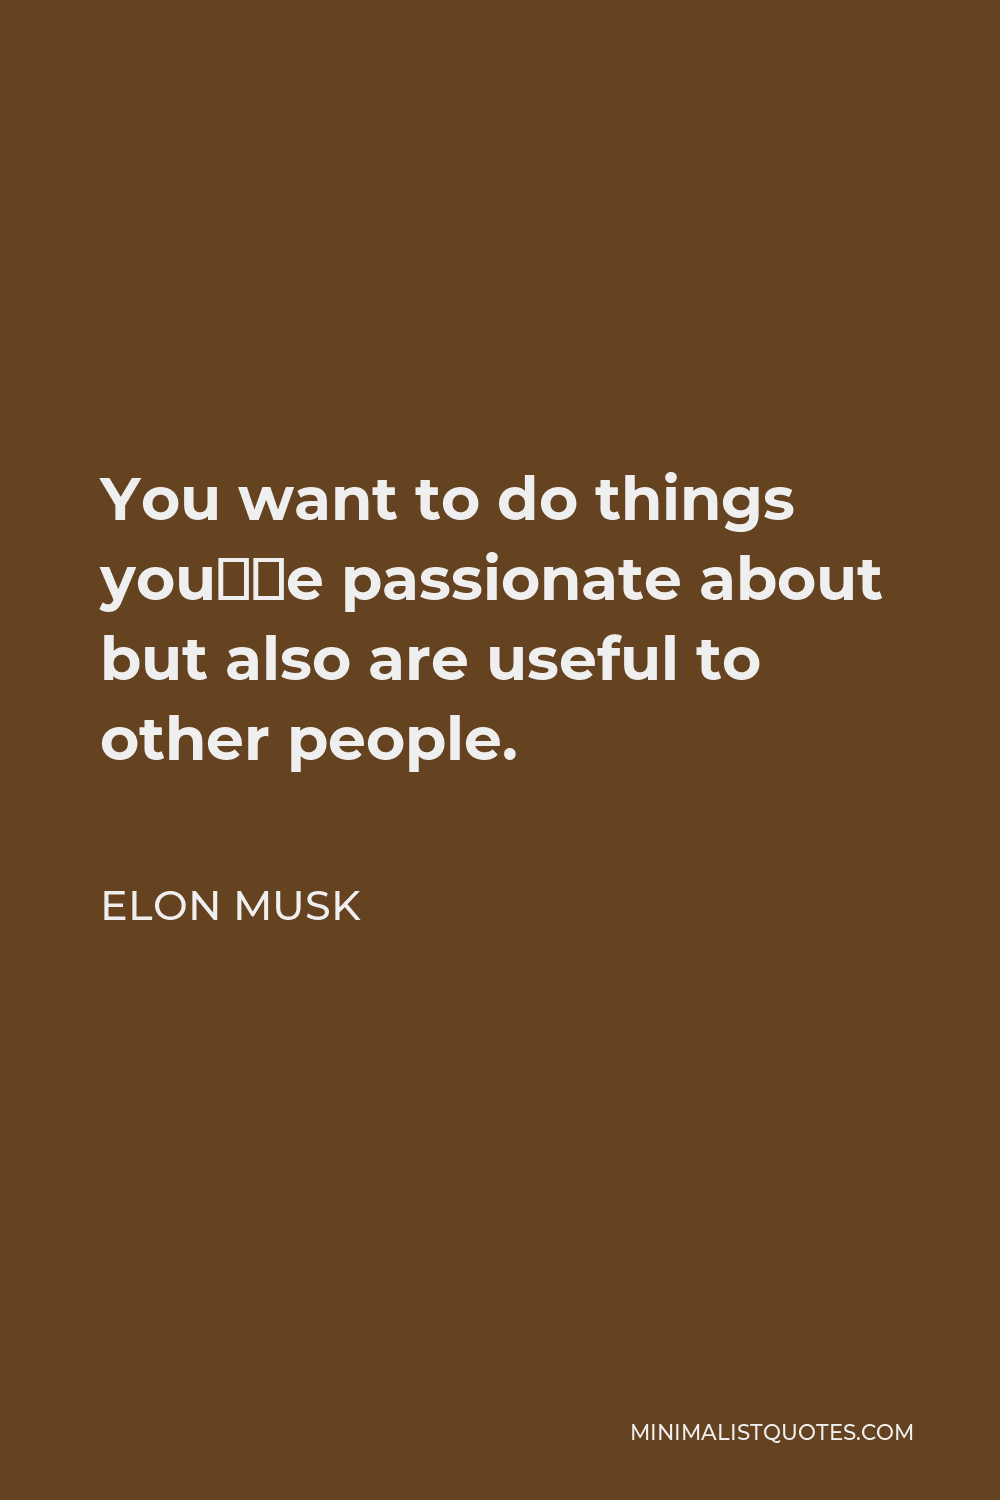 Elon Musk Quote - You want to do things you’re passionate about but also are useful to other people.